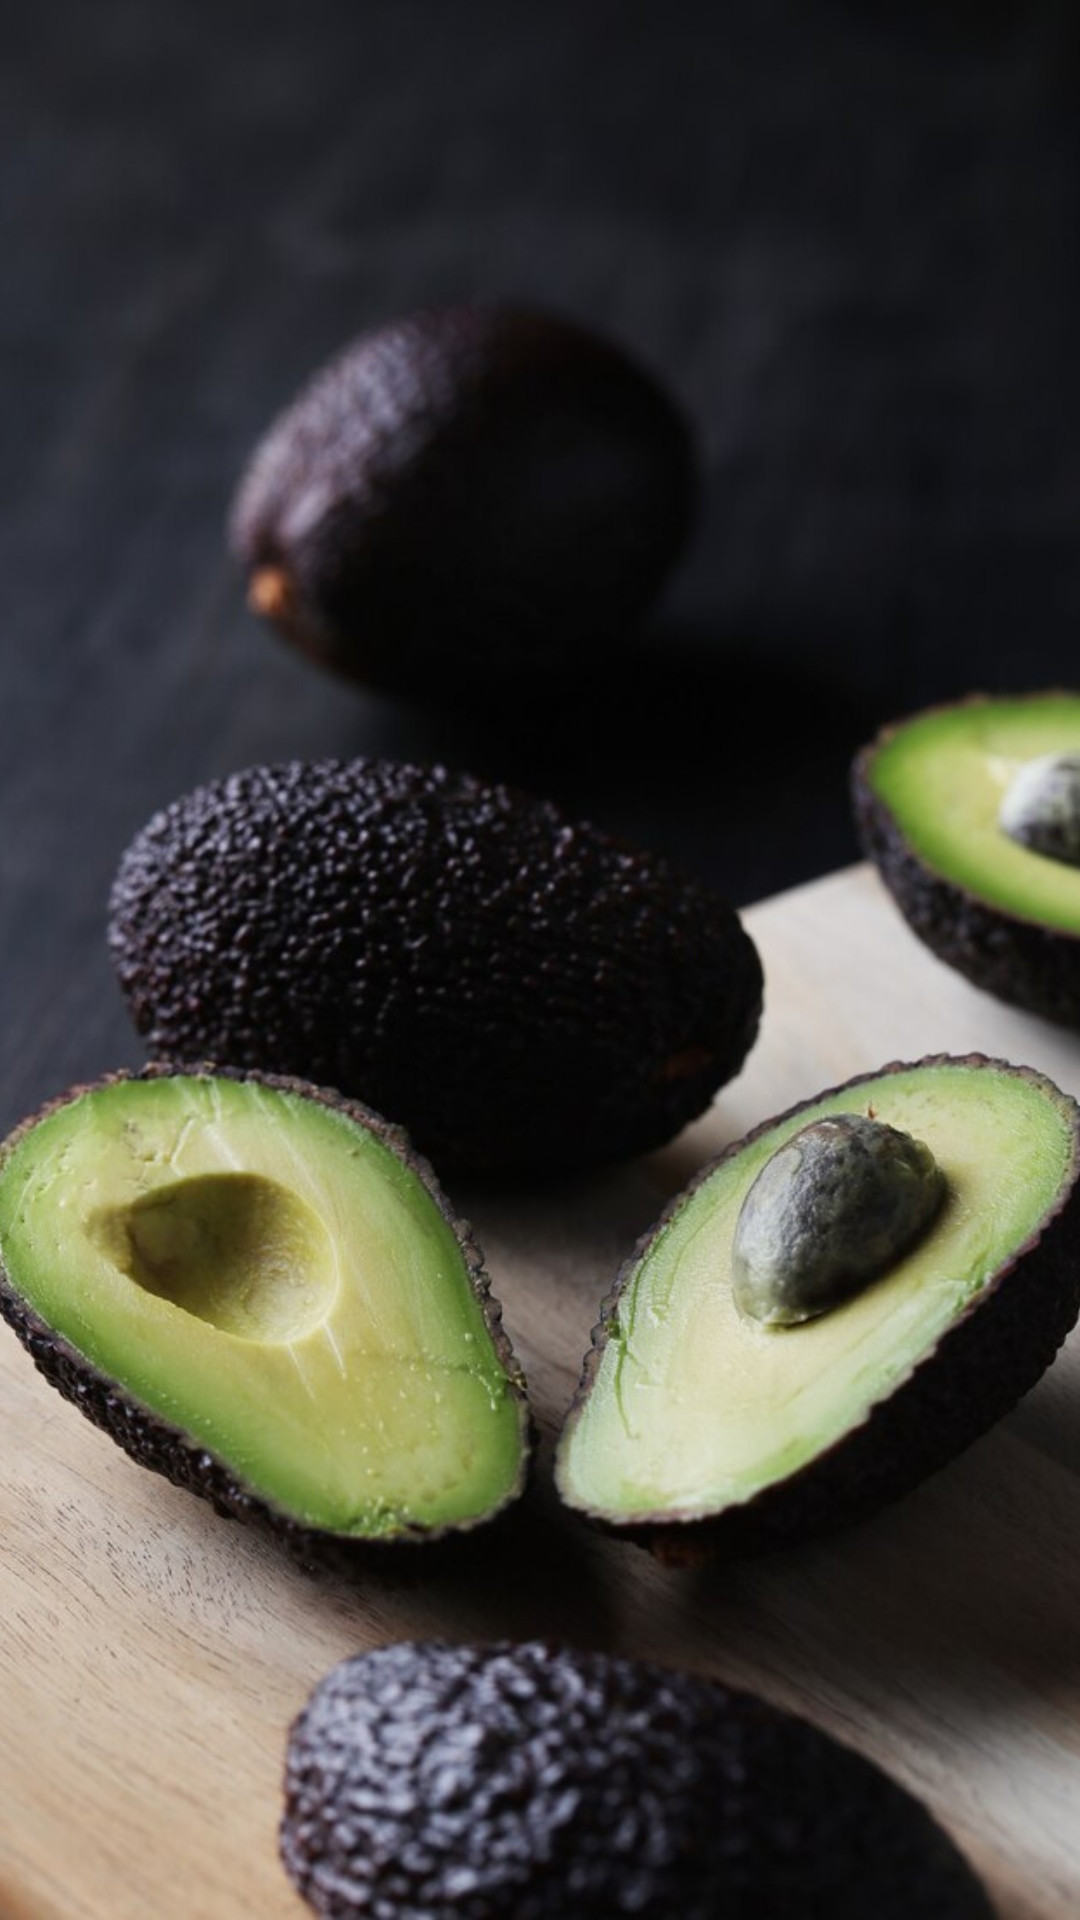 Inexpensive replacements of Avocado